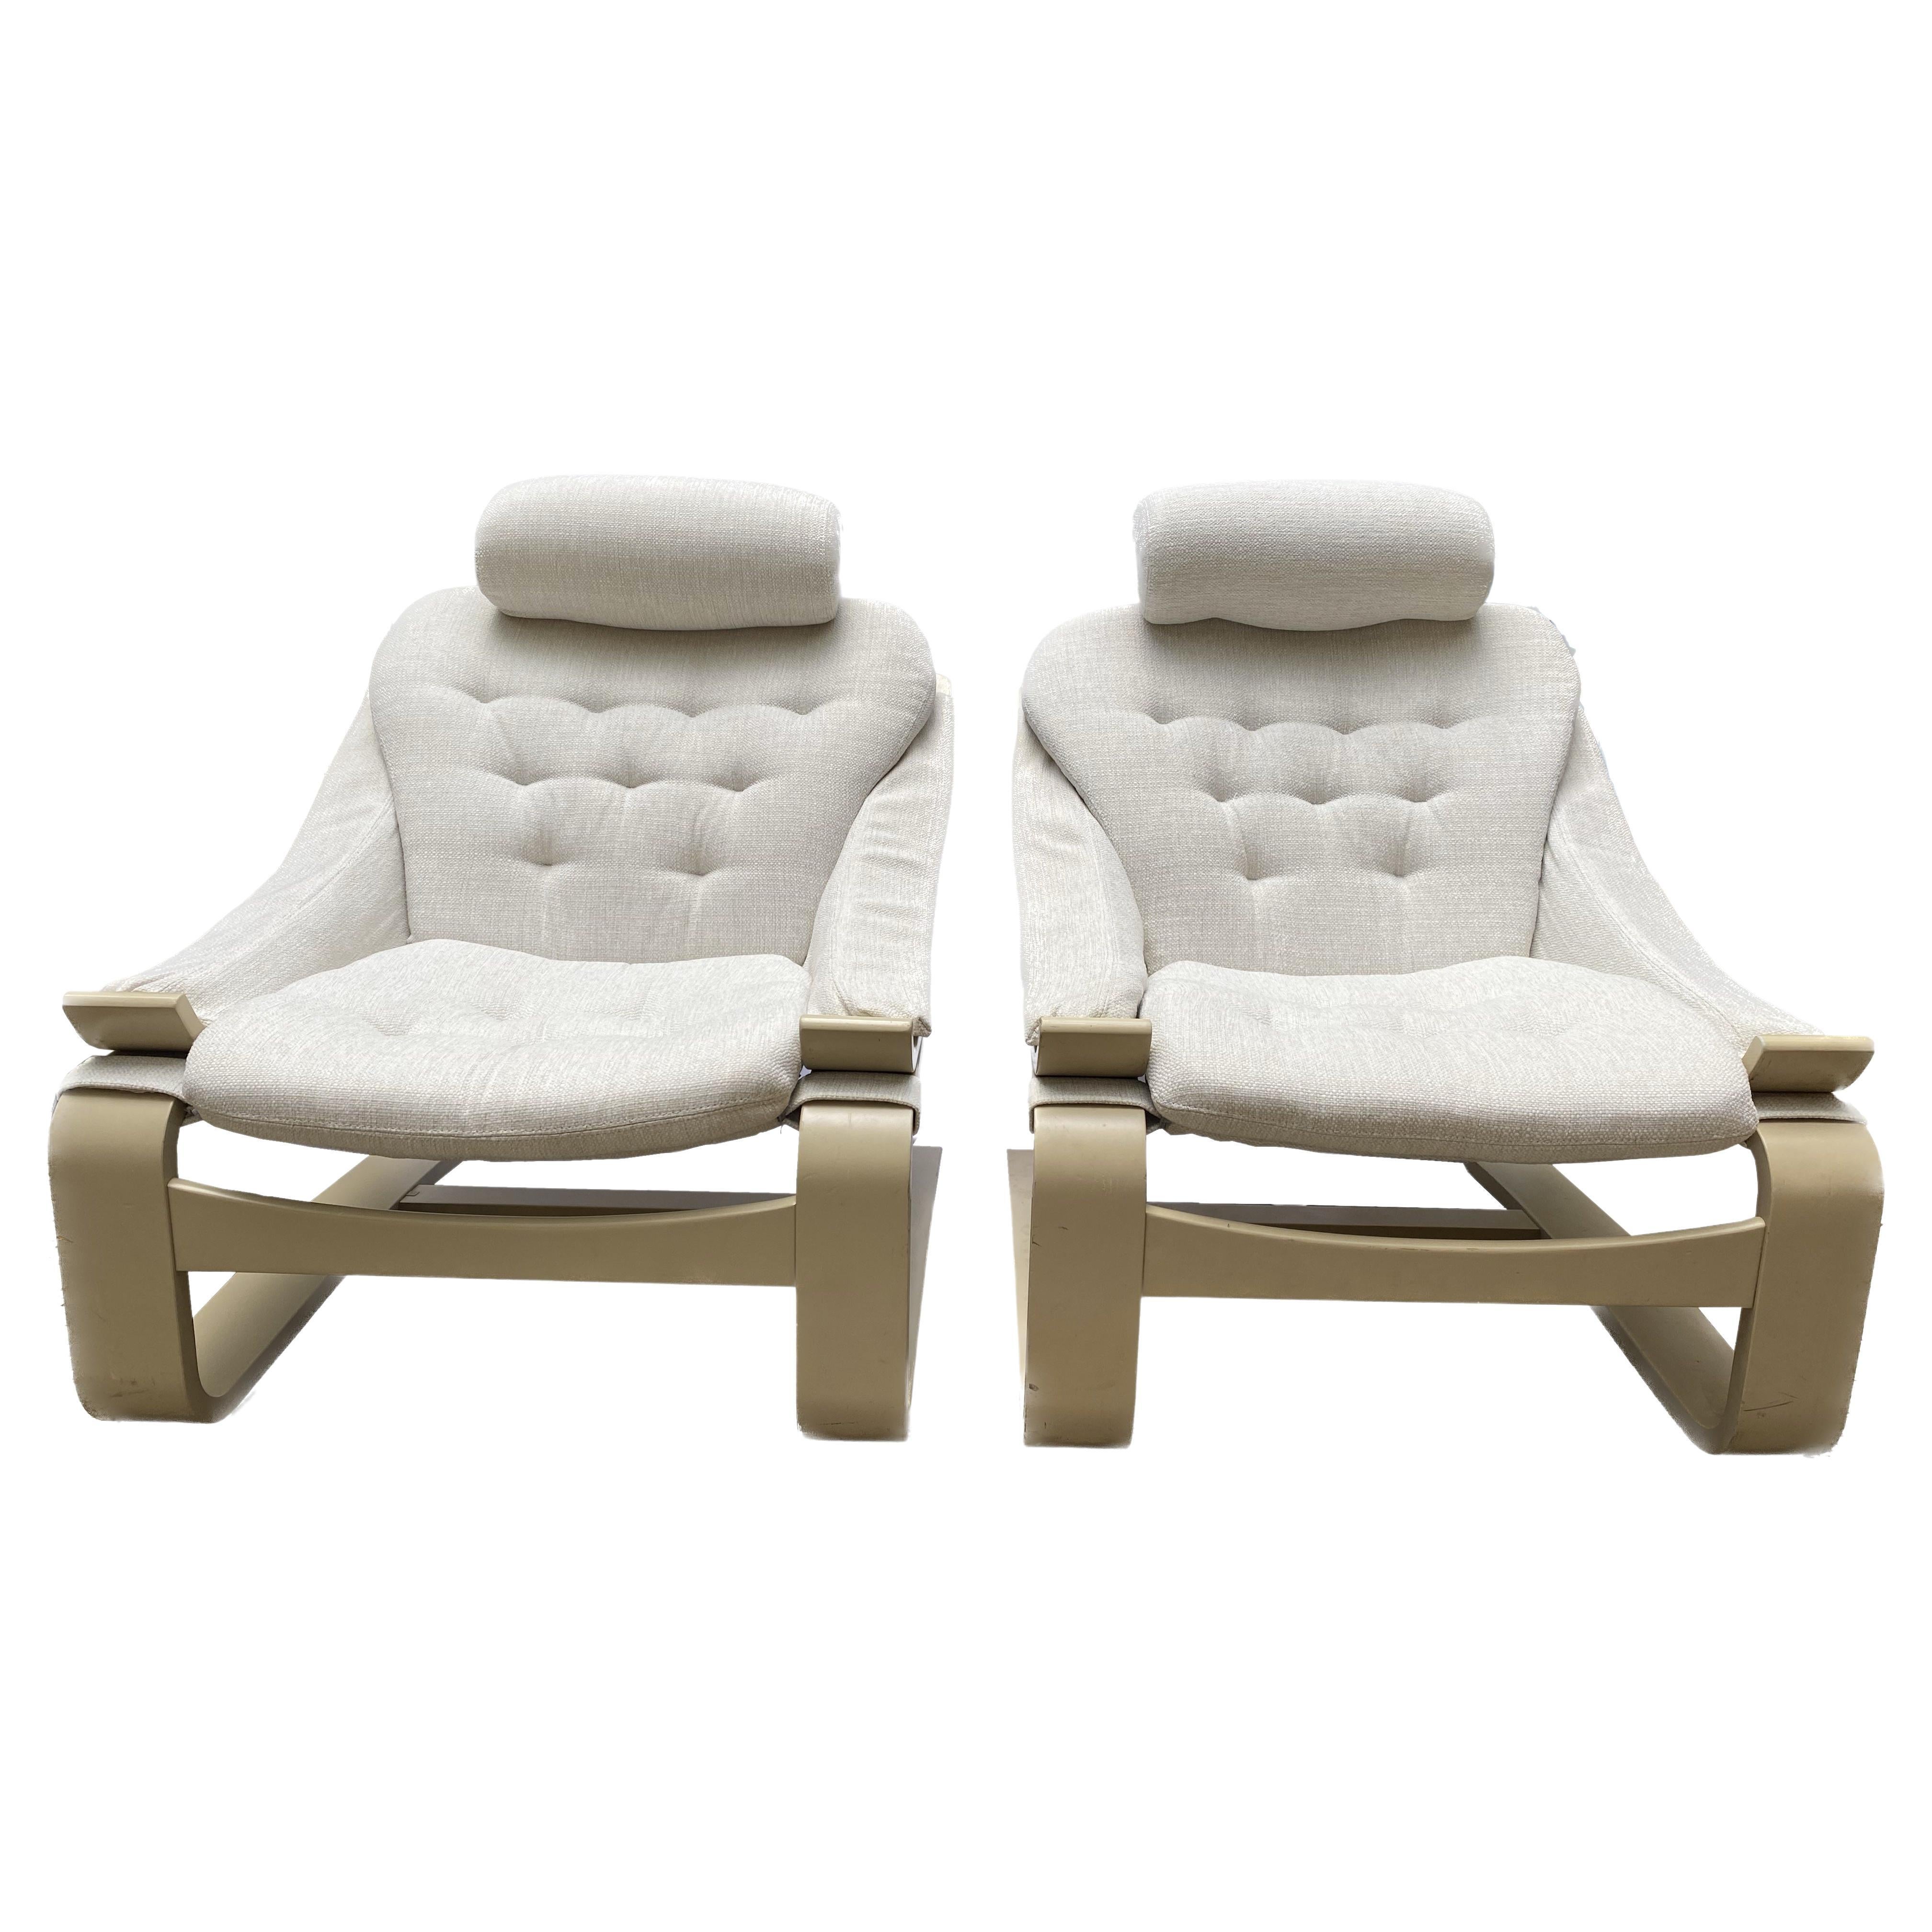 Pair of Kroken Armchairs - Ake Fribyter 1970 For Sale